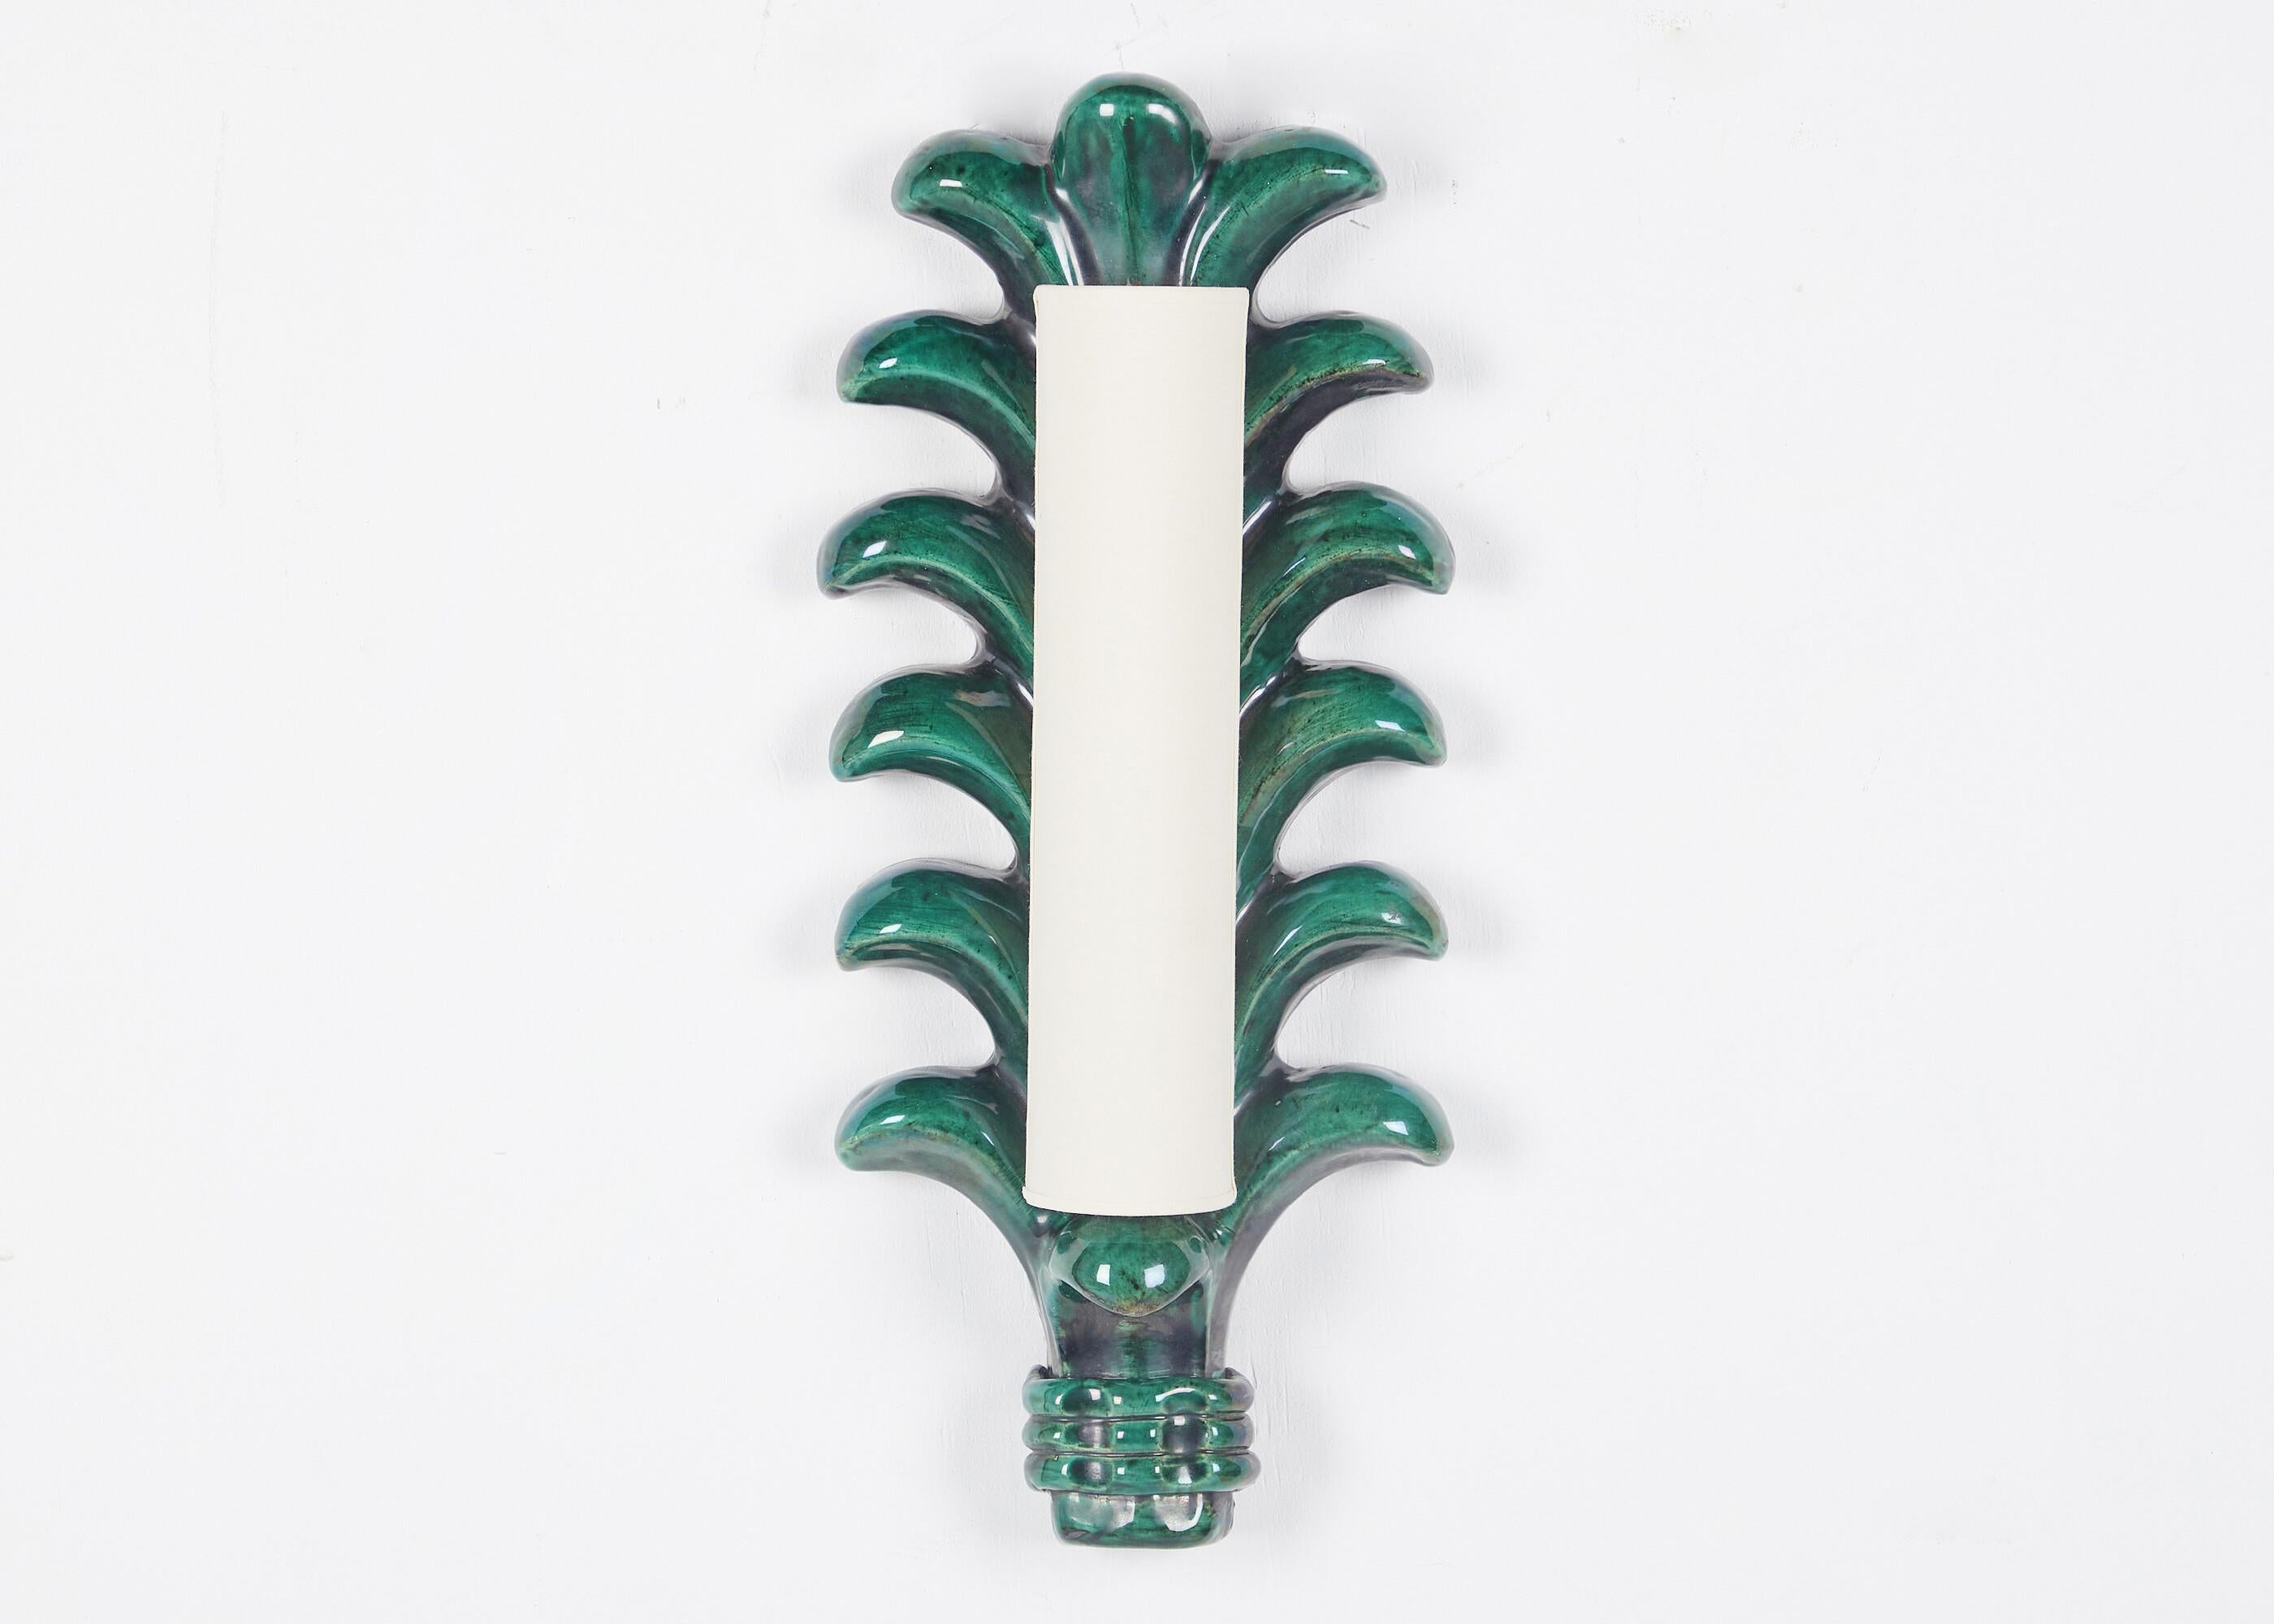 A mid-century, biomorphic sconce by French designer Georges Jouve, fired in a lush, variegated green glaze.  Signed on back. To our knowledge this may have been one of only five made in this beautiful green.